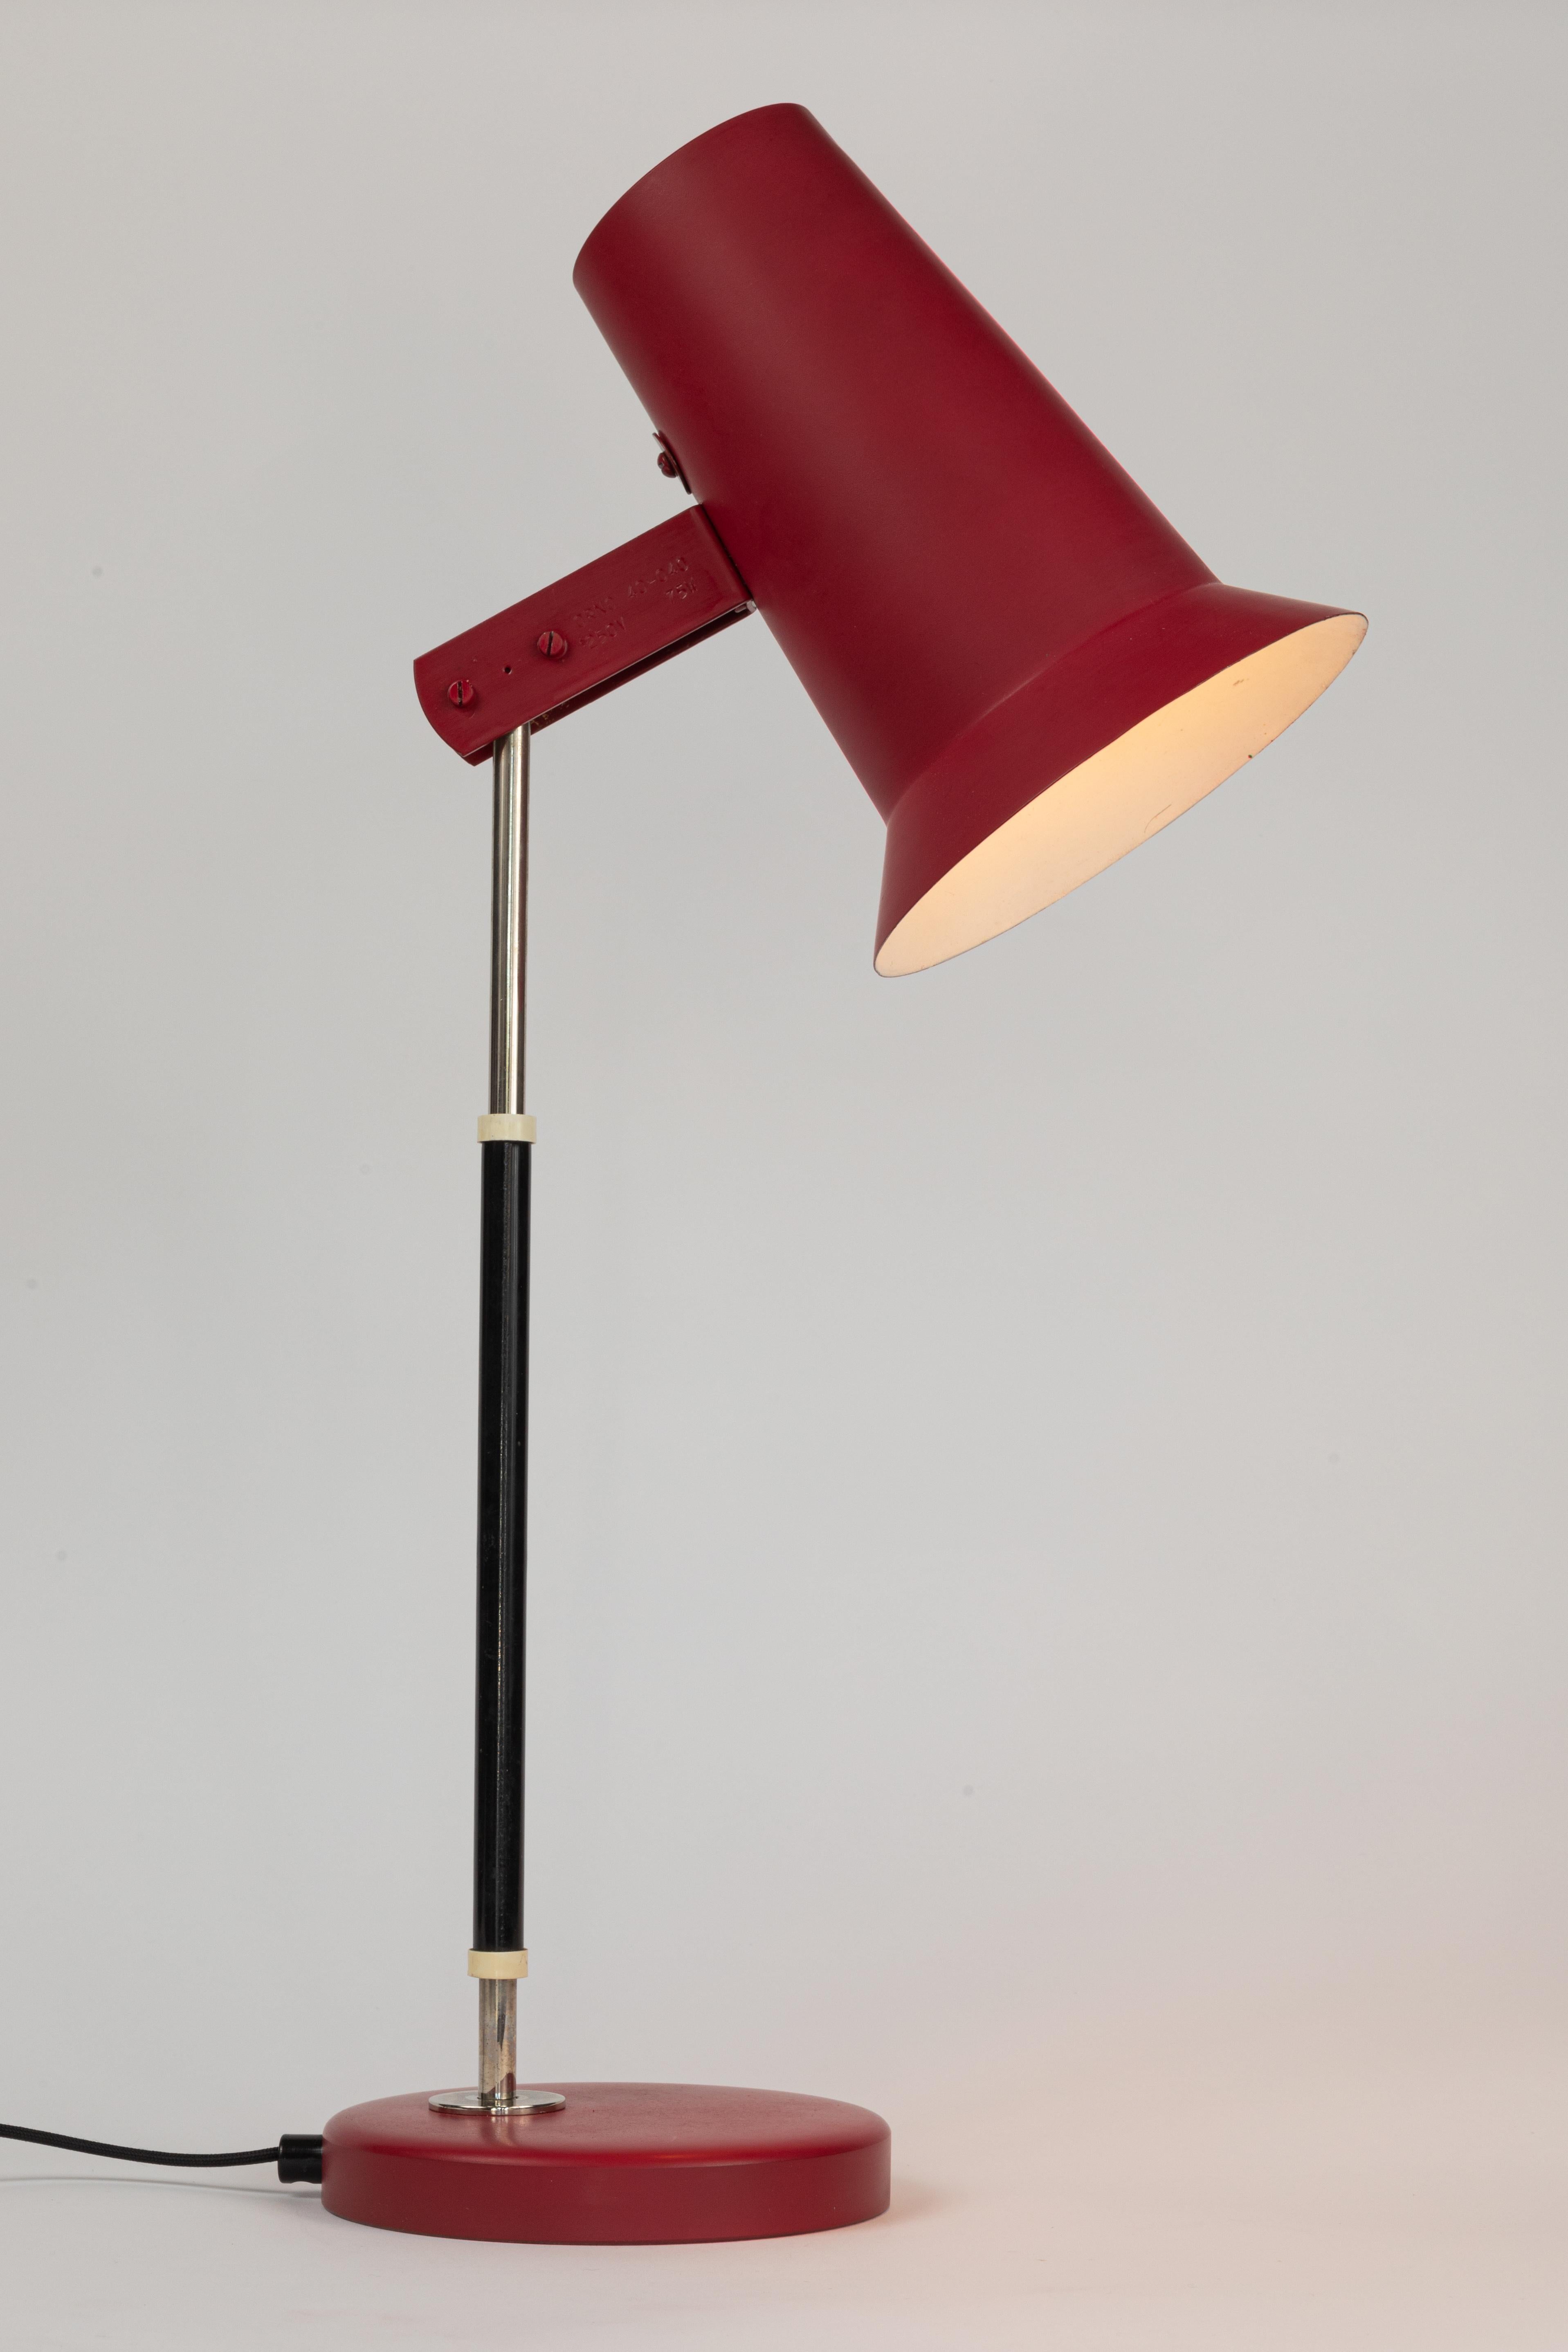 Pair of 1960s Yki Nummi Series 40-040 Red Table Lamps for Stockmann-Orno For Sale 1